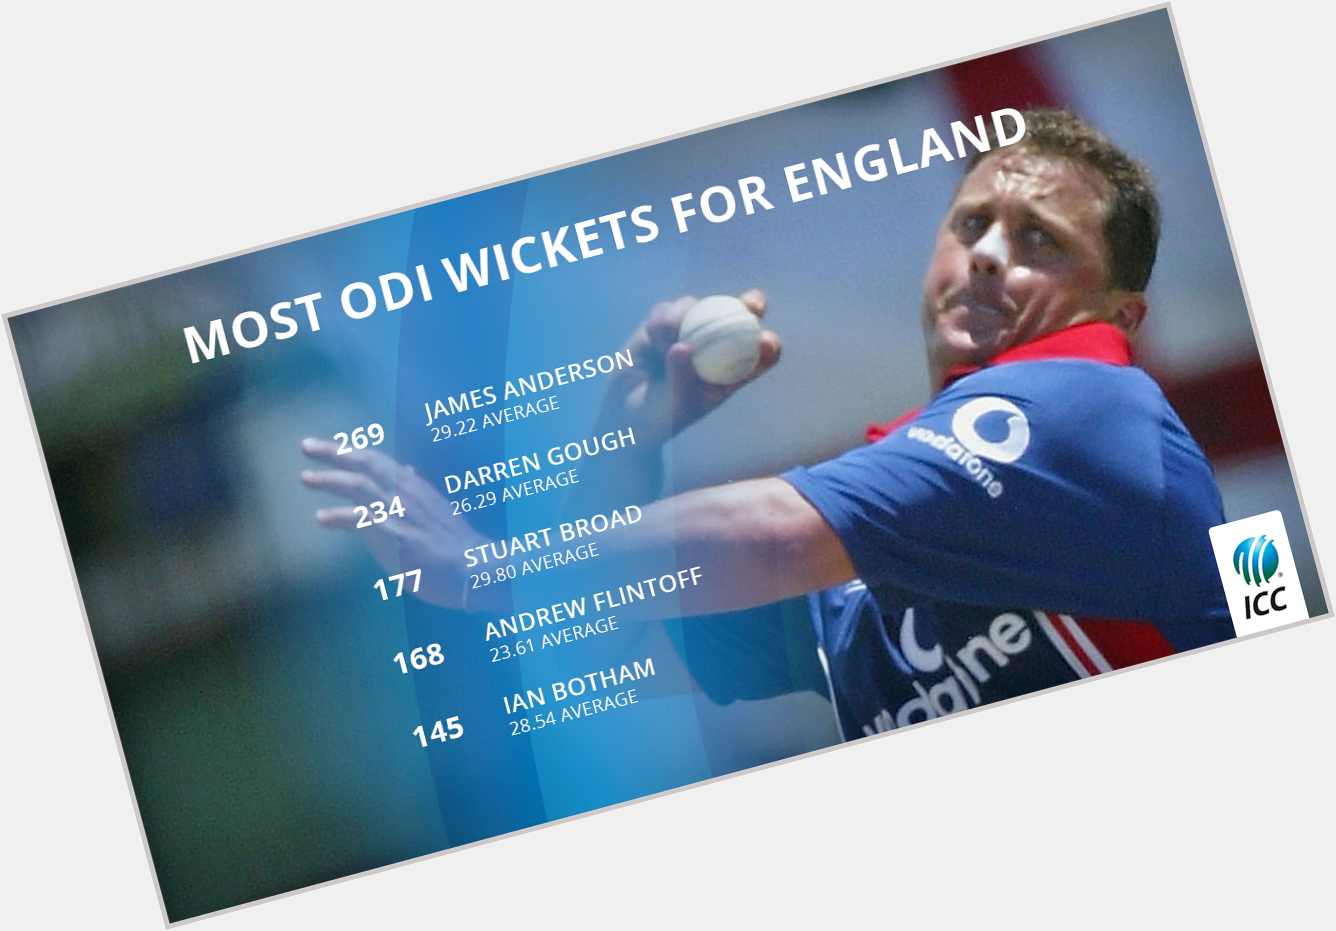 Happy Birthday to Englandcricket\s charismatic pace bowler,
Darren.Gough!
